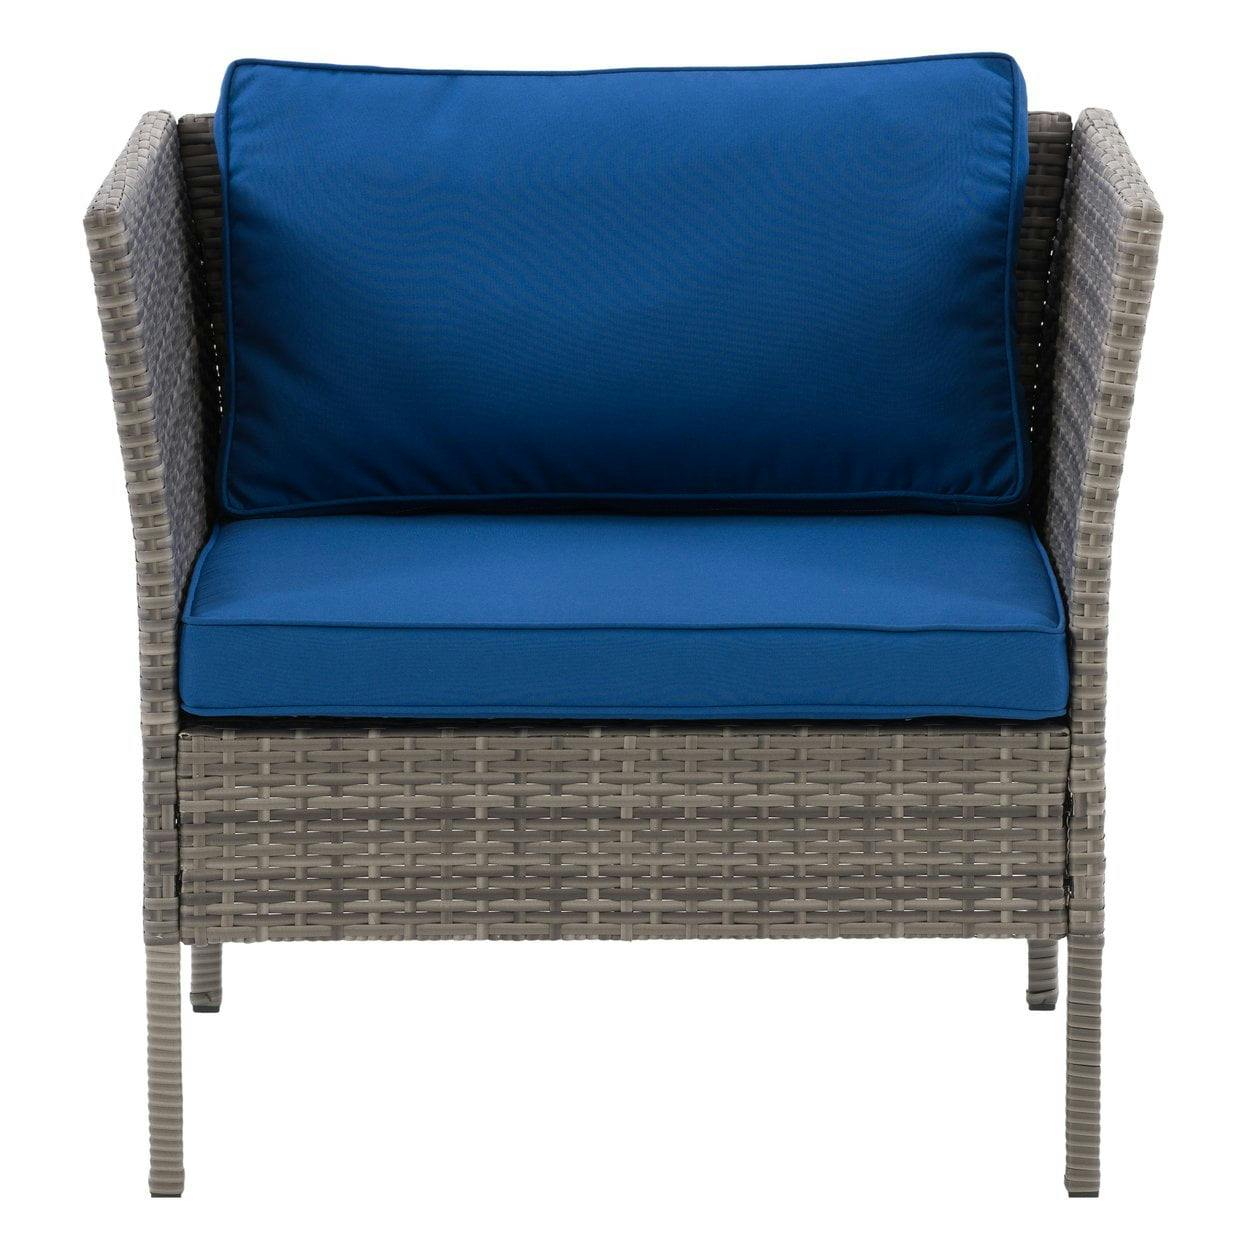 CorLiving 27'' Powder-Coated Steel Patio Armchair with Plush Blue Cushions